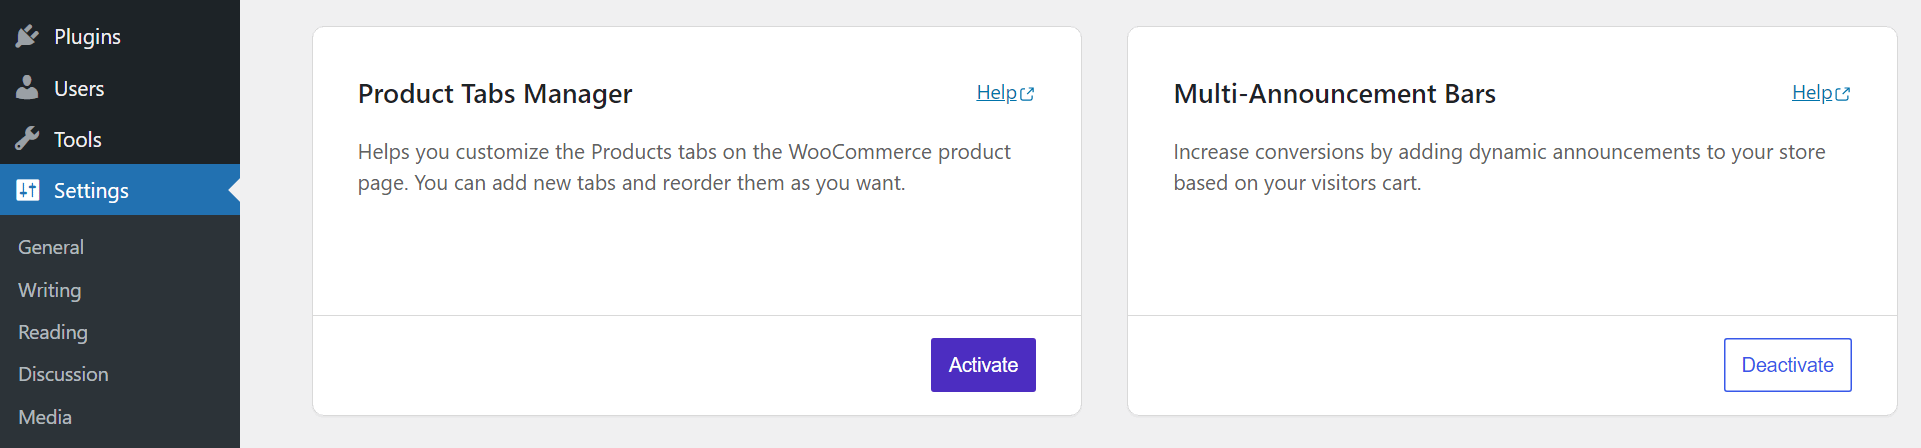 Activating the products tab manager in the Sparks WooCommerce settings.